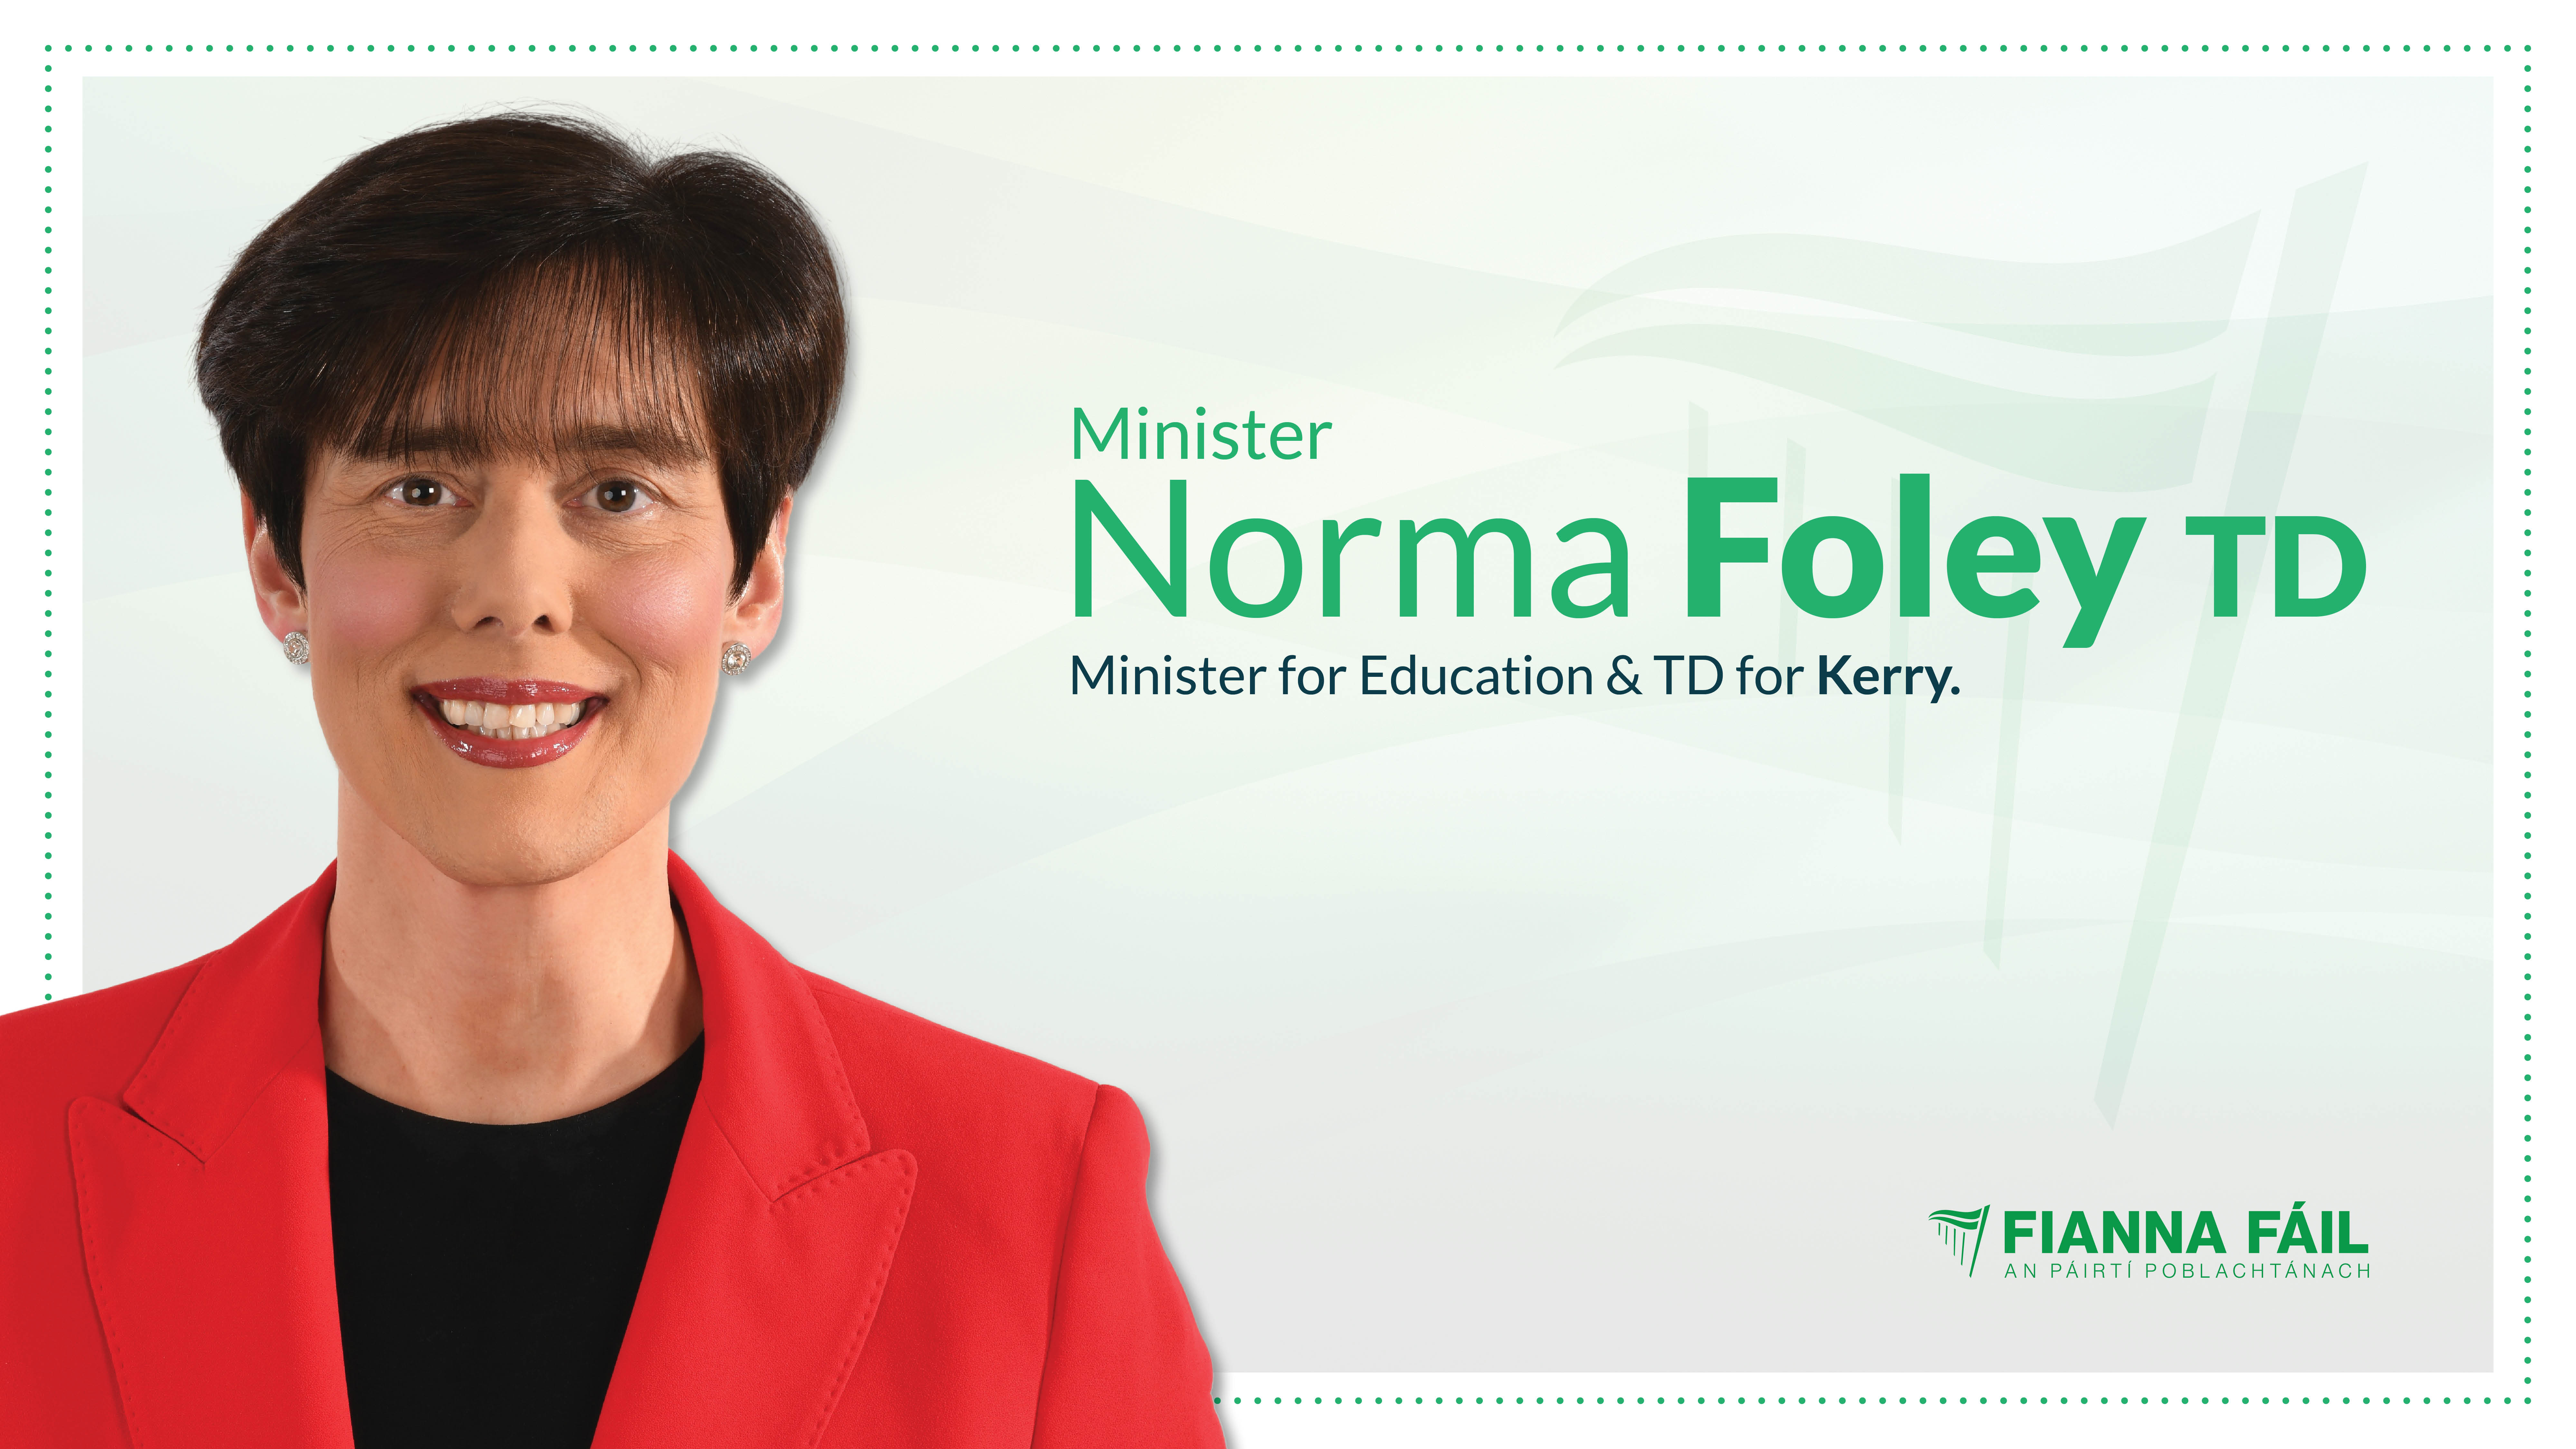 Ministers Foley welcomes establishment of new special school in Cork and expansion of existing special school capacity to meet needs of children with special educational needs